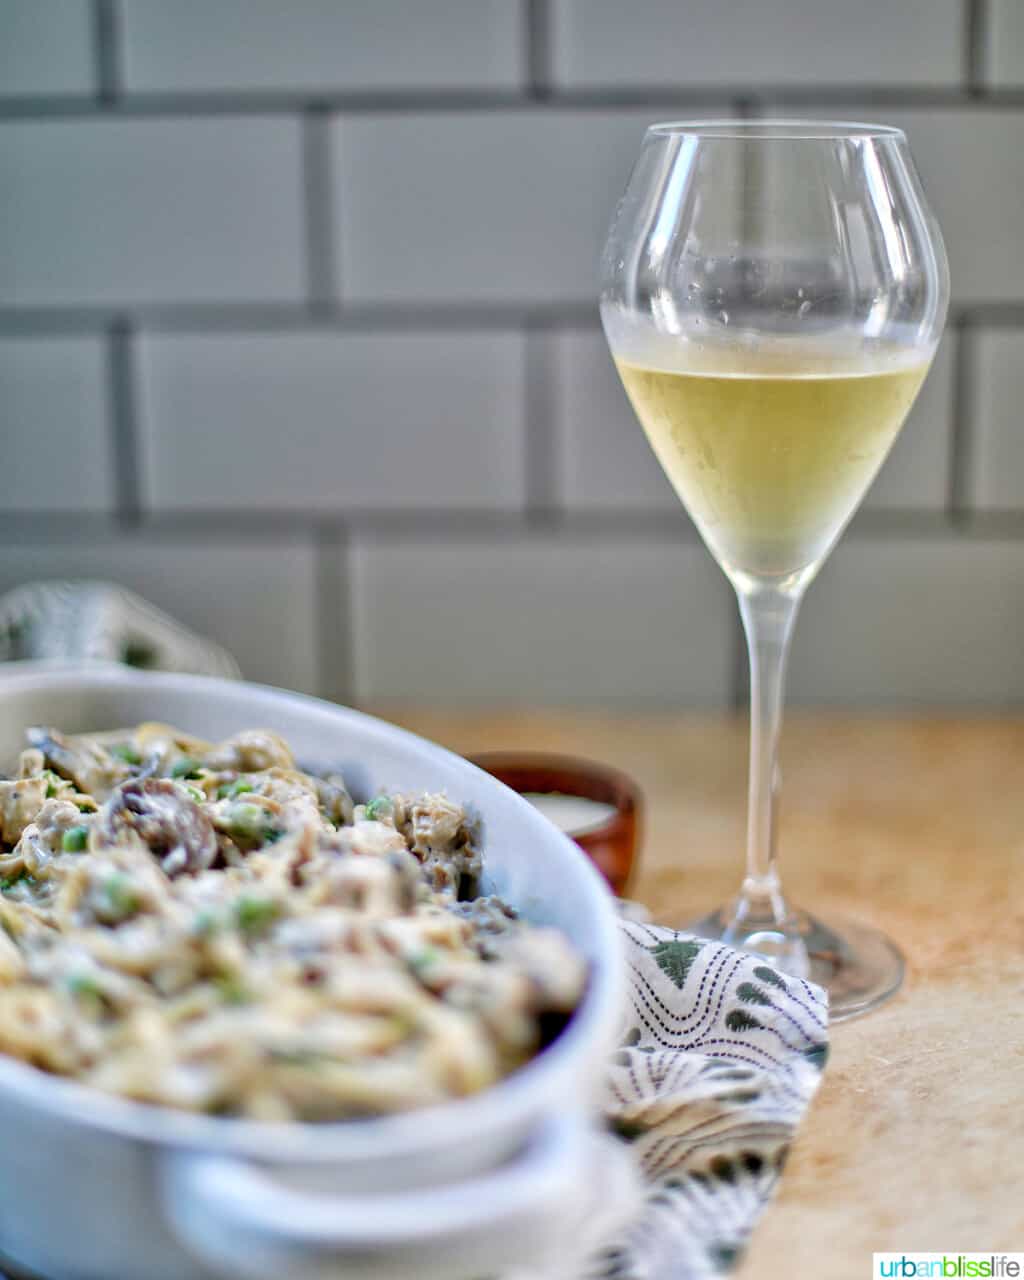 Turkey Tetrazzini in serving dish with glass of white wine